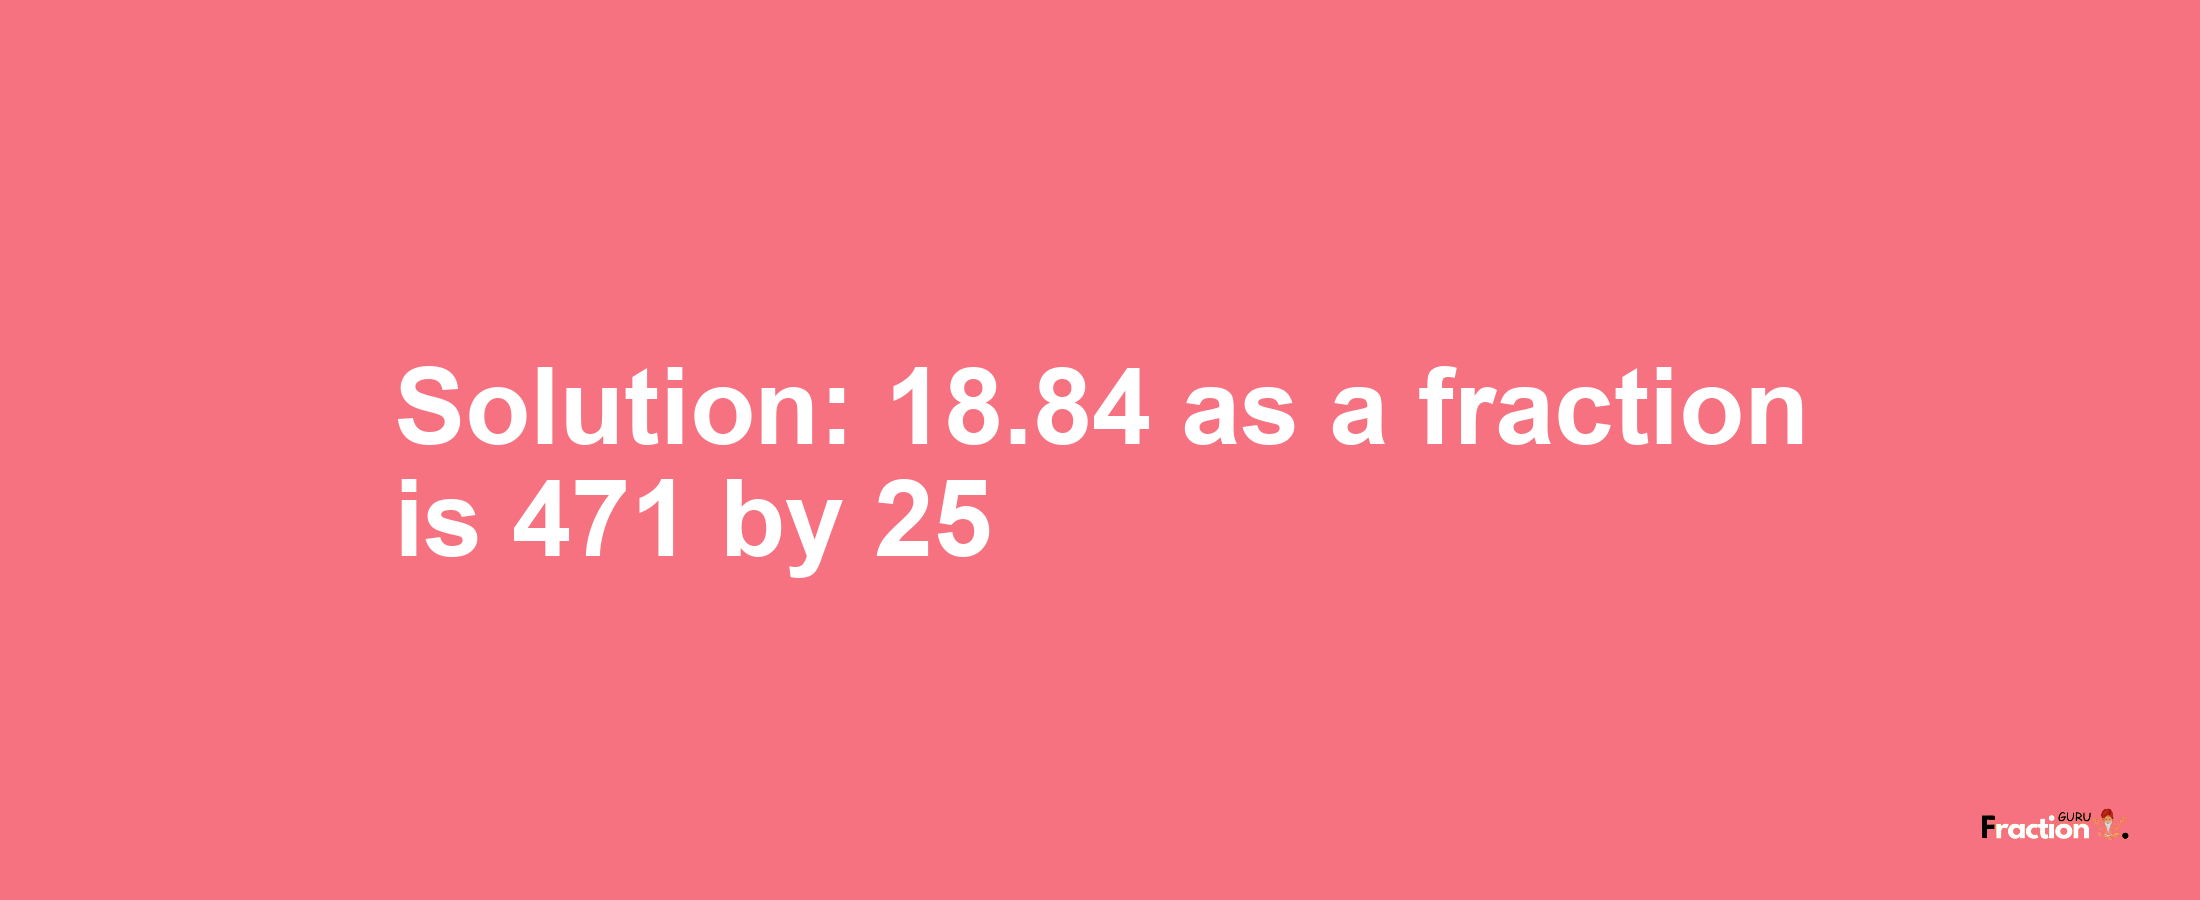 Solution:18.84 as a fraction is 471/25